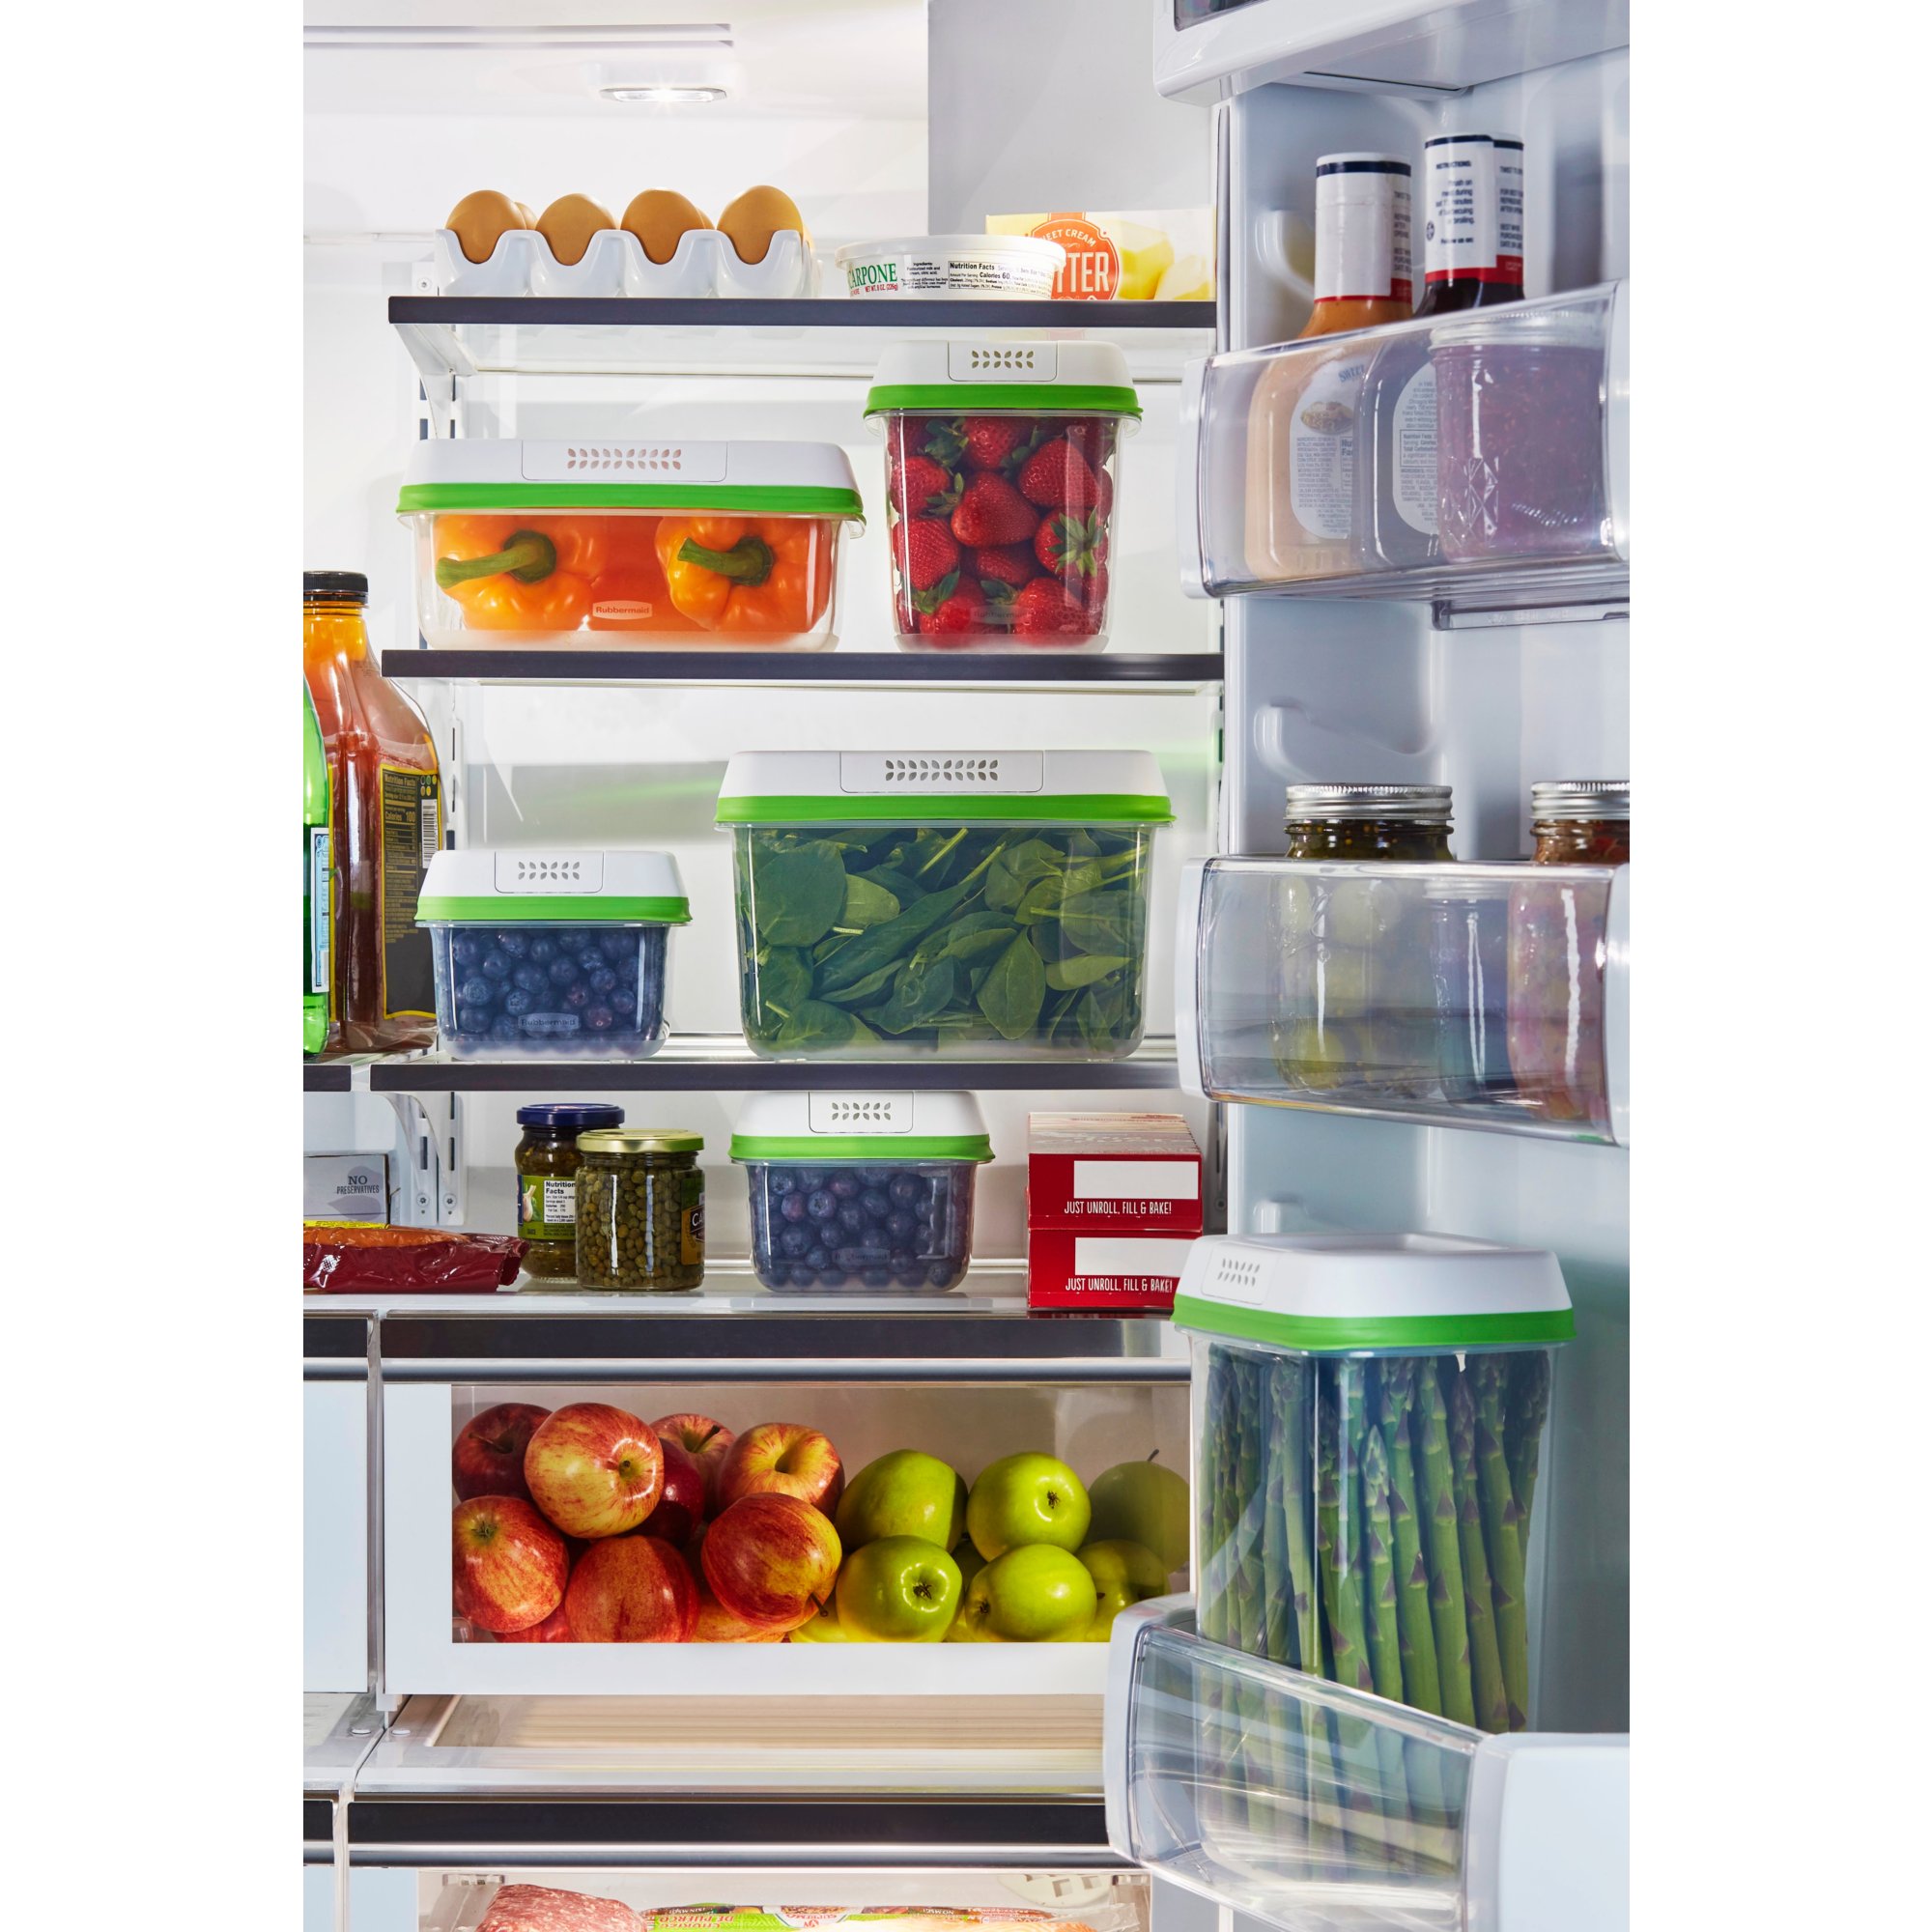 https://s7d9.scene7.com/is/image/NewellRubbermaid/SAP-rubbermaid-food-storage-green-5pk-1MS-1M-1MT-1LS-1L-group-in-fridge-with-food-lifestyle-1?wid=2000&hei=2000